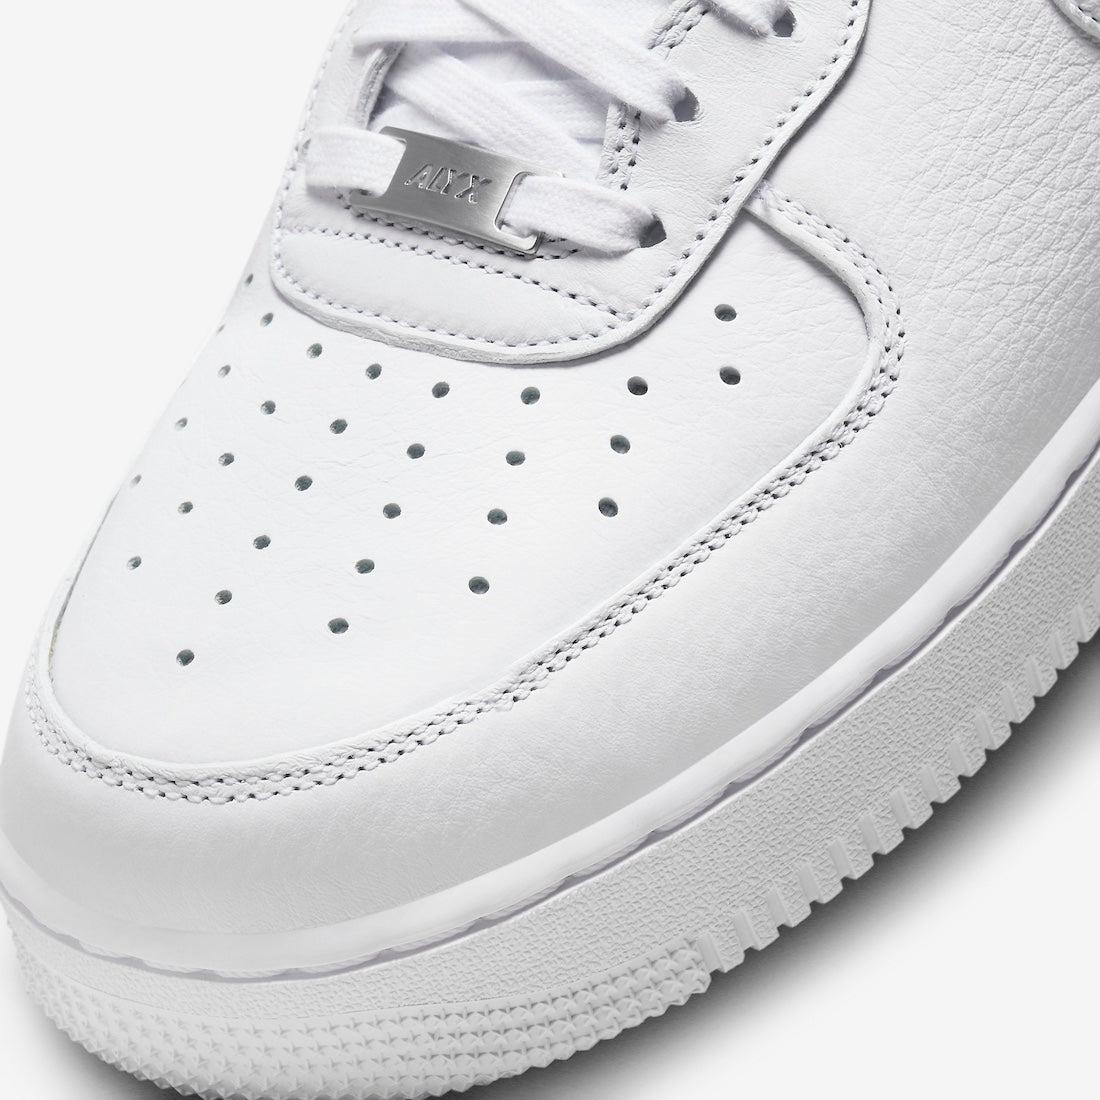 ALYX x Nike Air Force 1 Low “White”